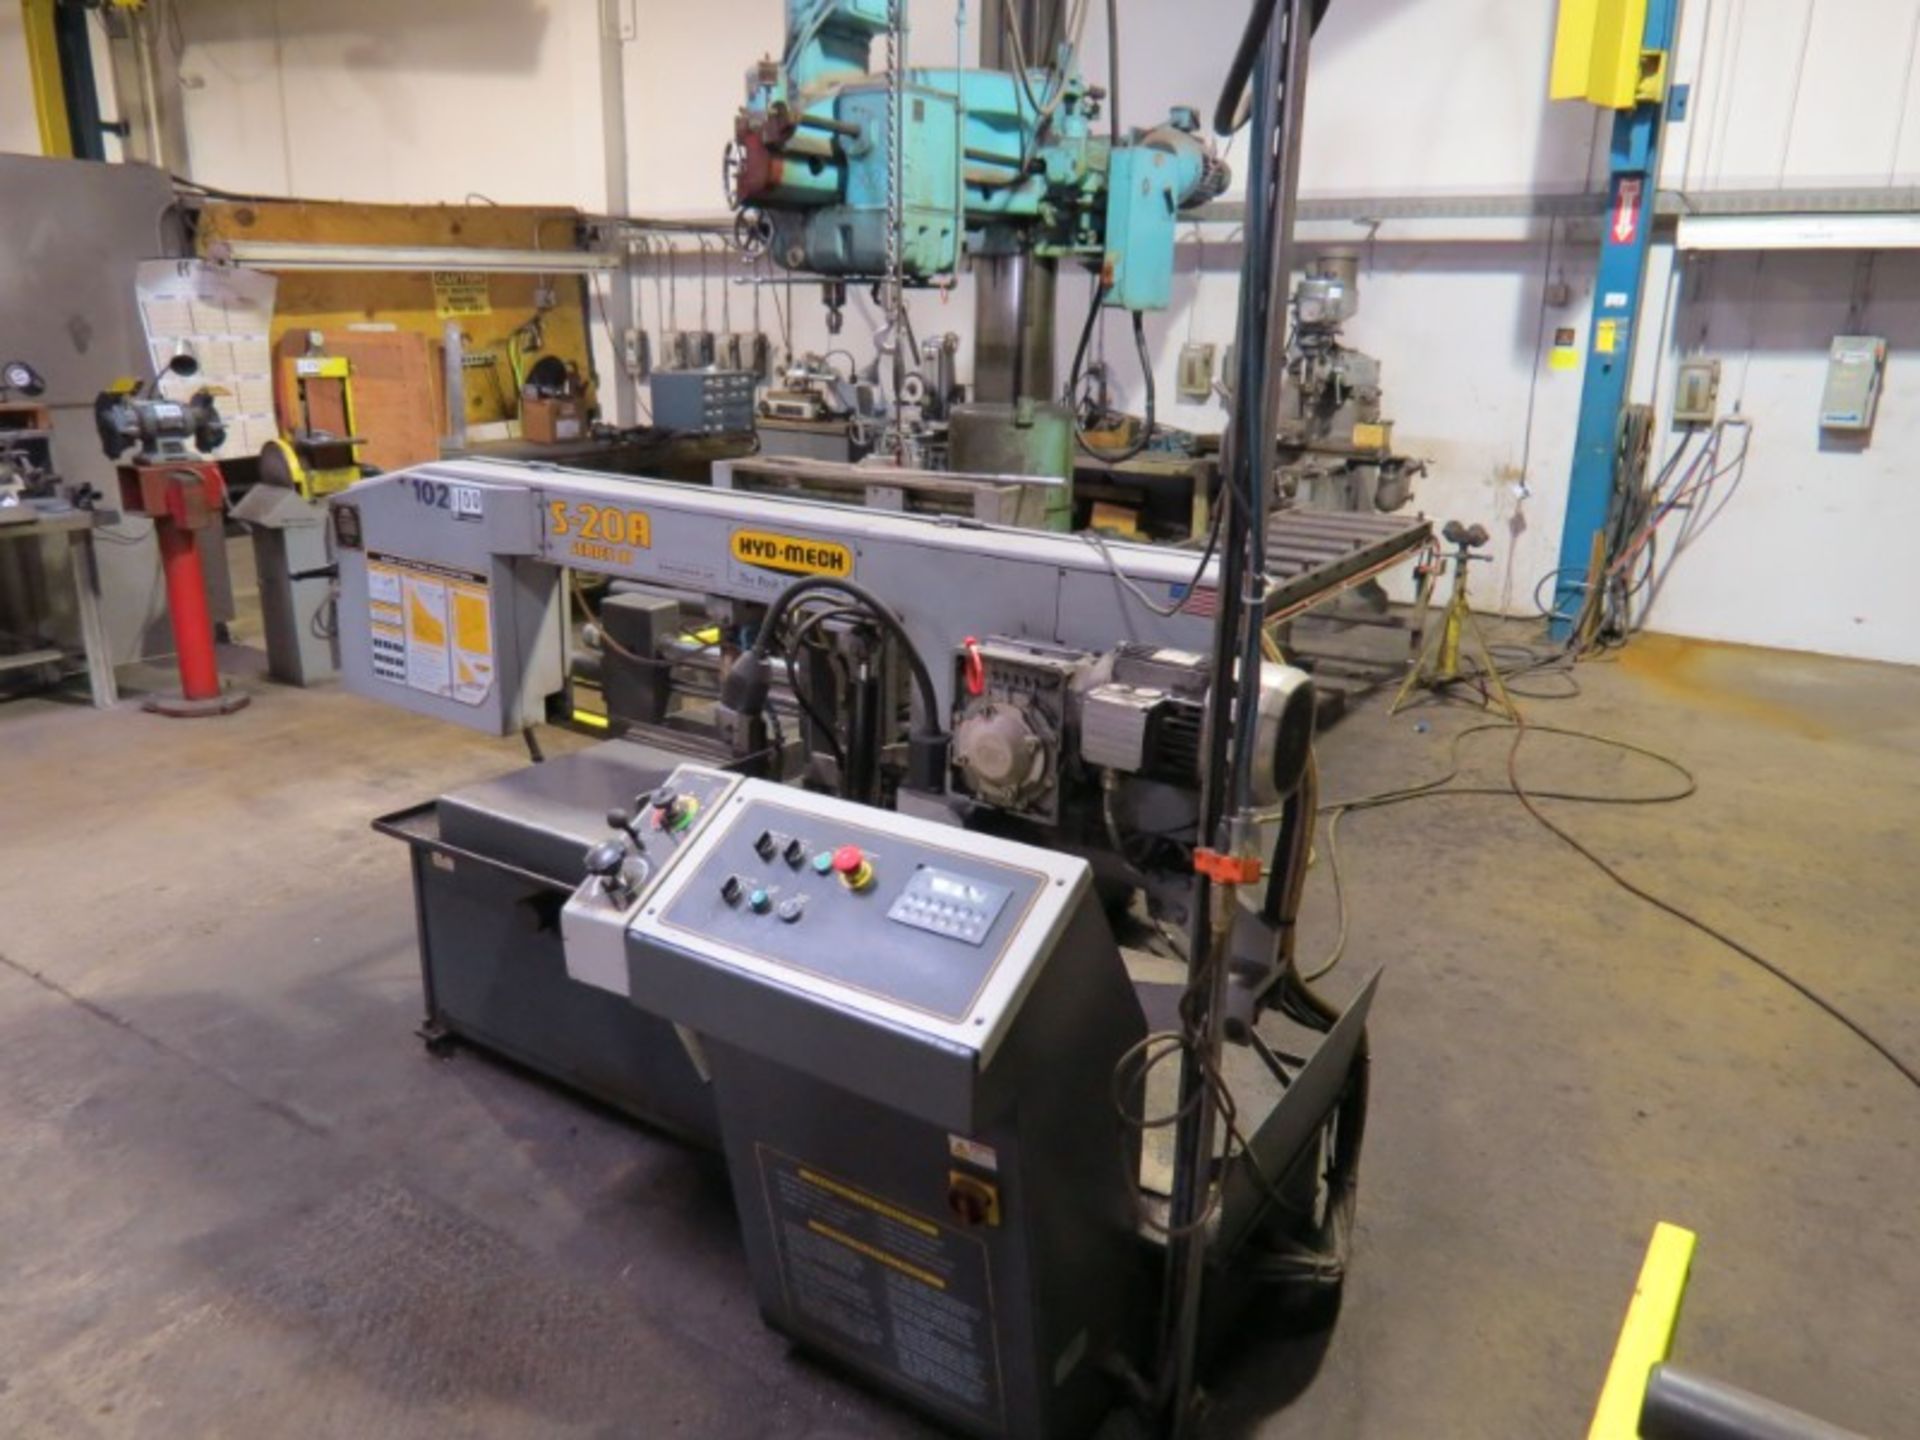 HYD-Mech S-20A Series III Automatic Horizantal Band Saw 13'' x 18'' Cap, Miter Auto Feed - Image 4 of 5